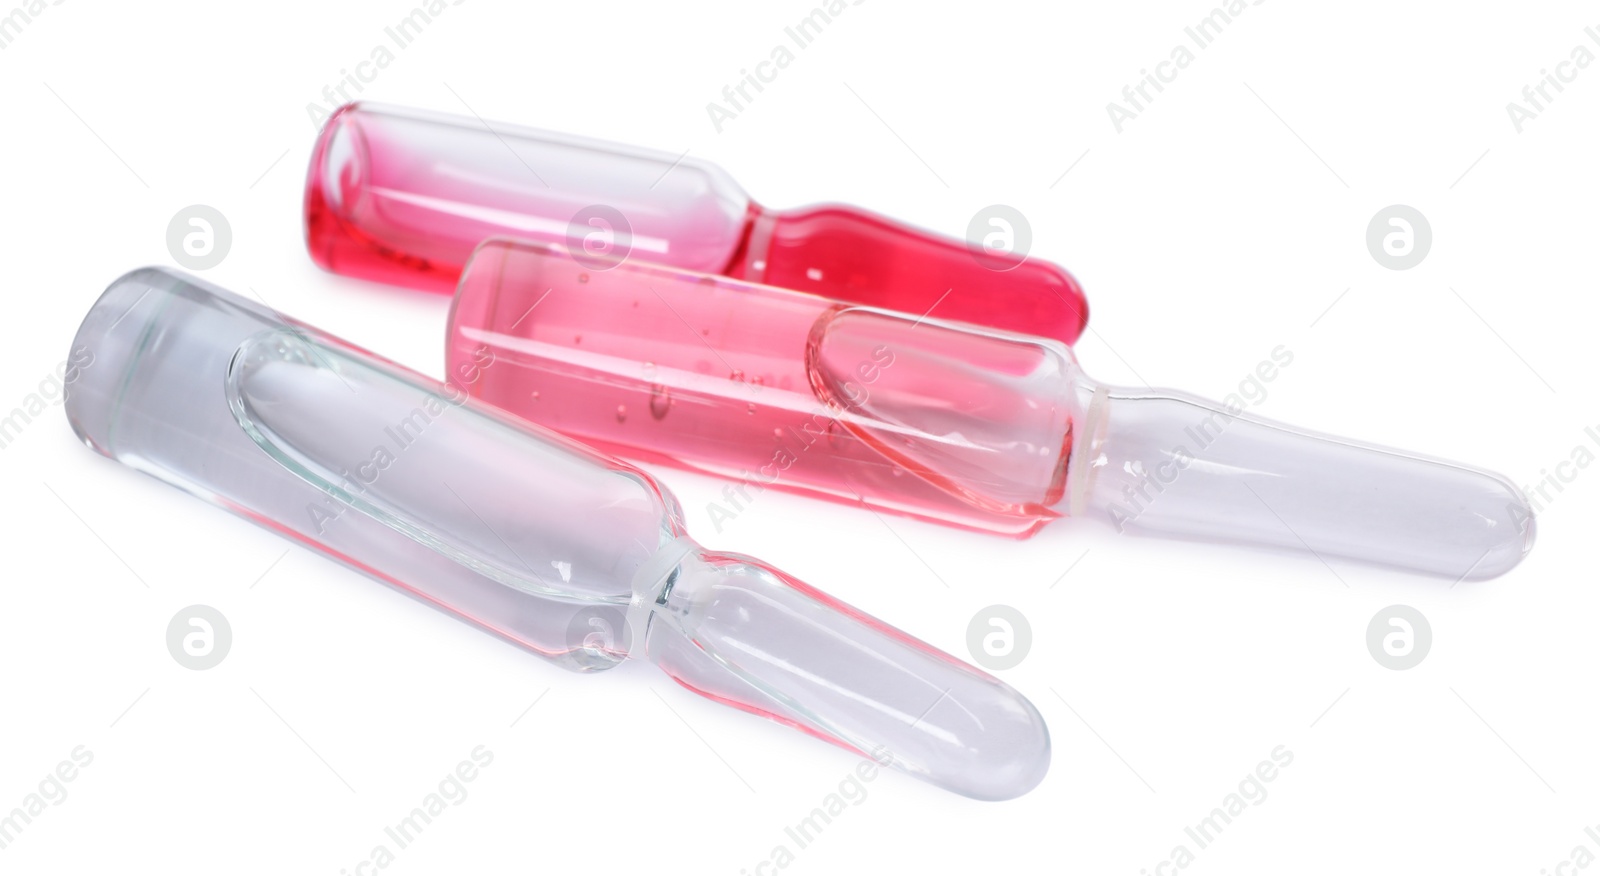 Photo of Glass ampoules with pharmaceutical products on white background